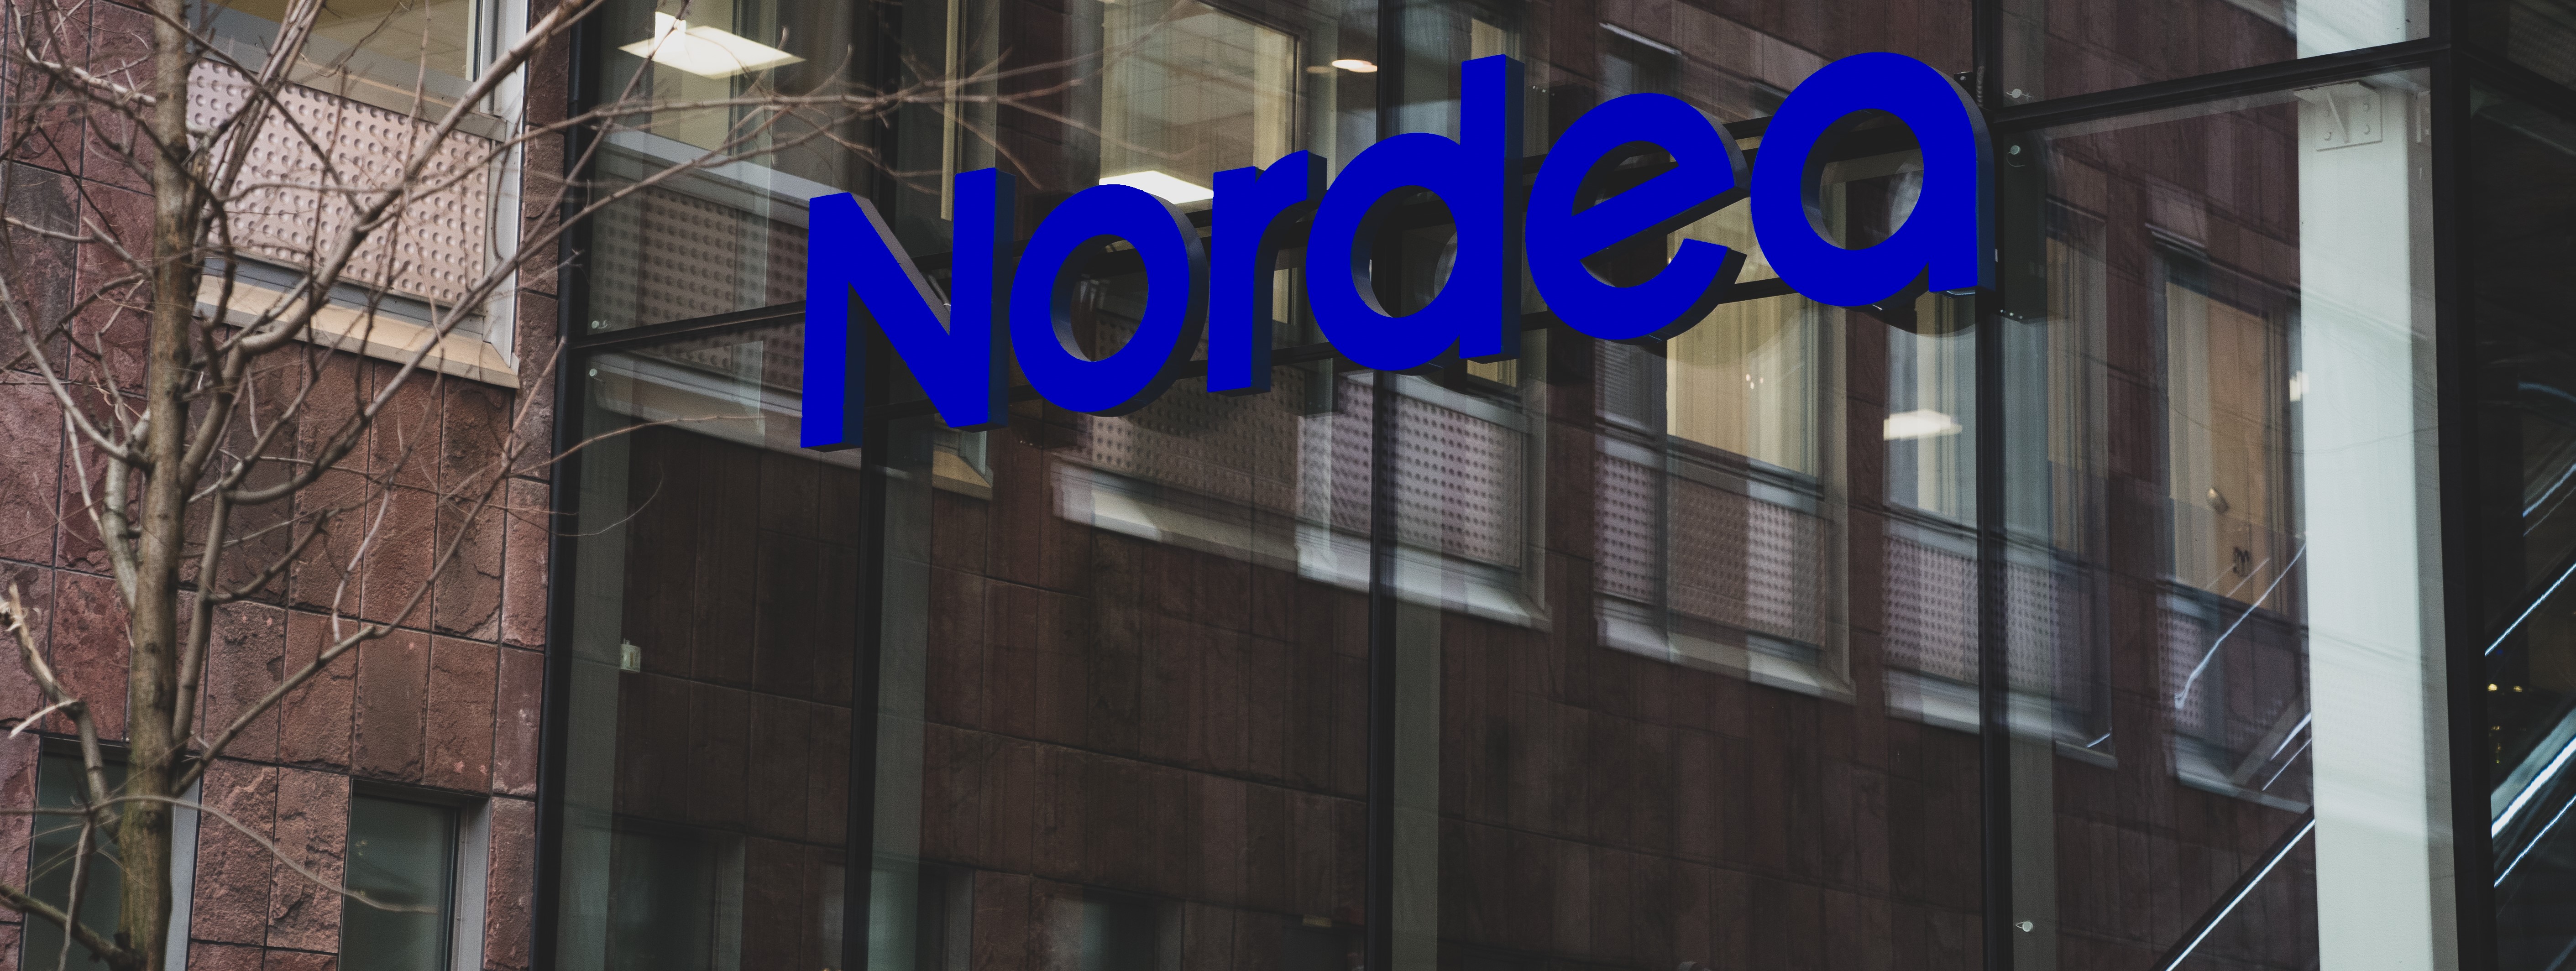 Back-office Specialist in Corporate Actions, Nordea Retail & Corporate Services, Swedish customers